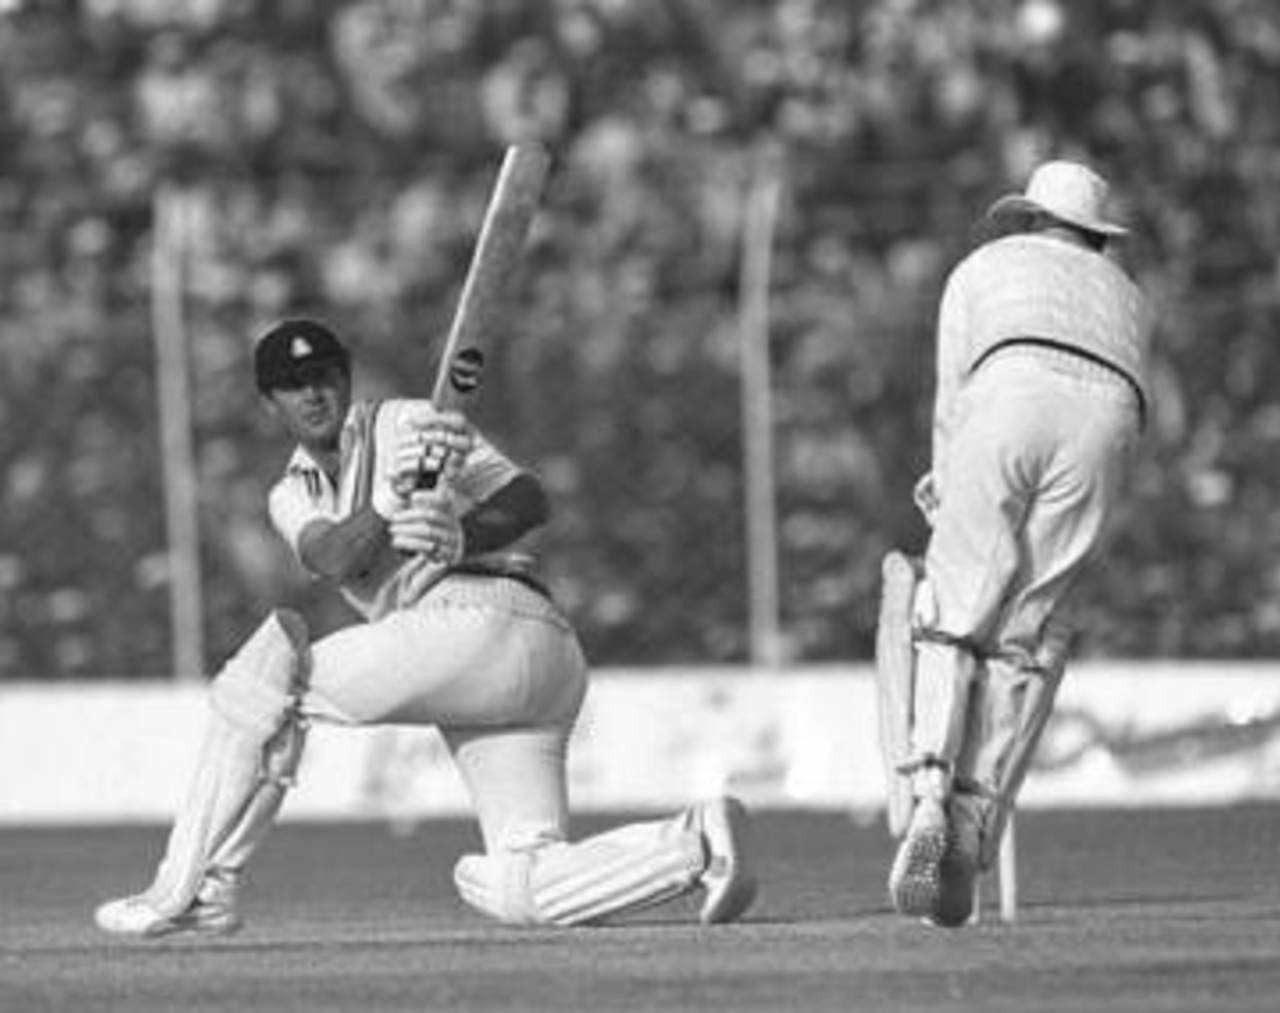 Geoff Boycott sweeps on his way to passing Garry Sobers' world record aggregate of Test runs, India v England, Delhi, December 1981